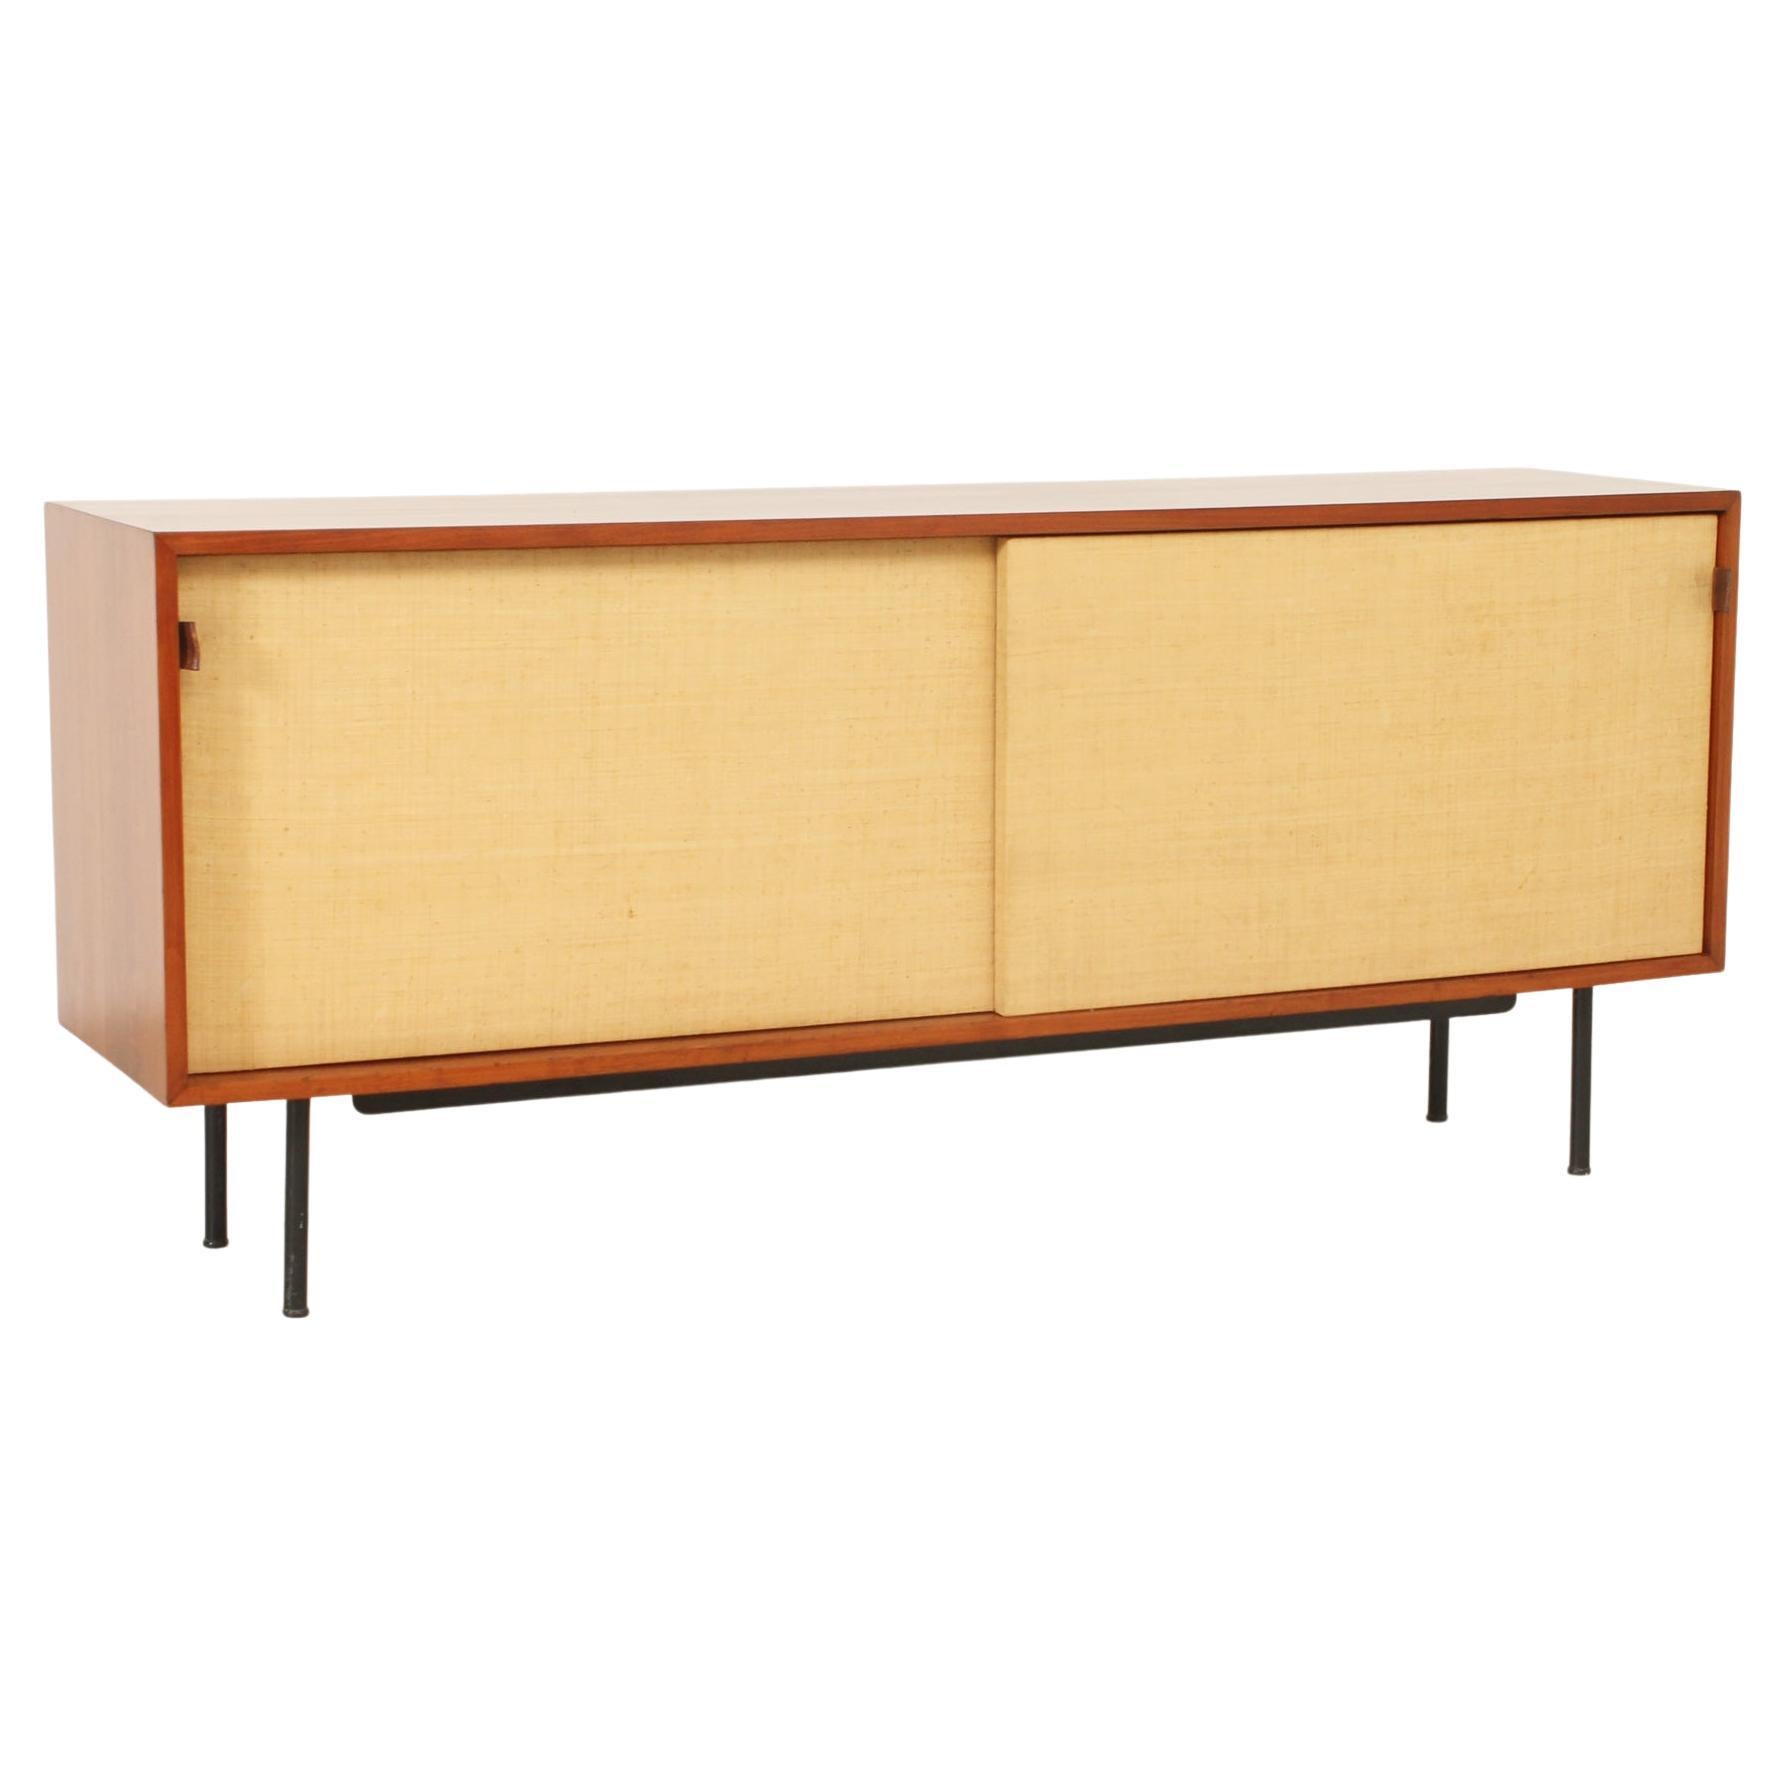 Florence Knoll Sideboard Model 116 with Seagrass Sliding Doors